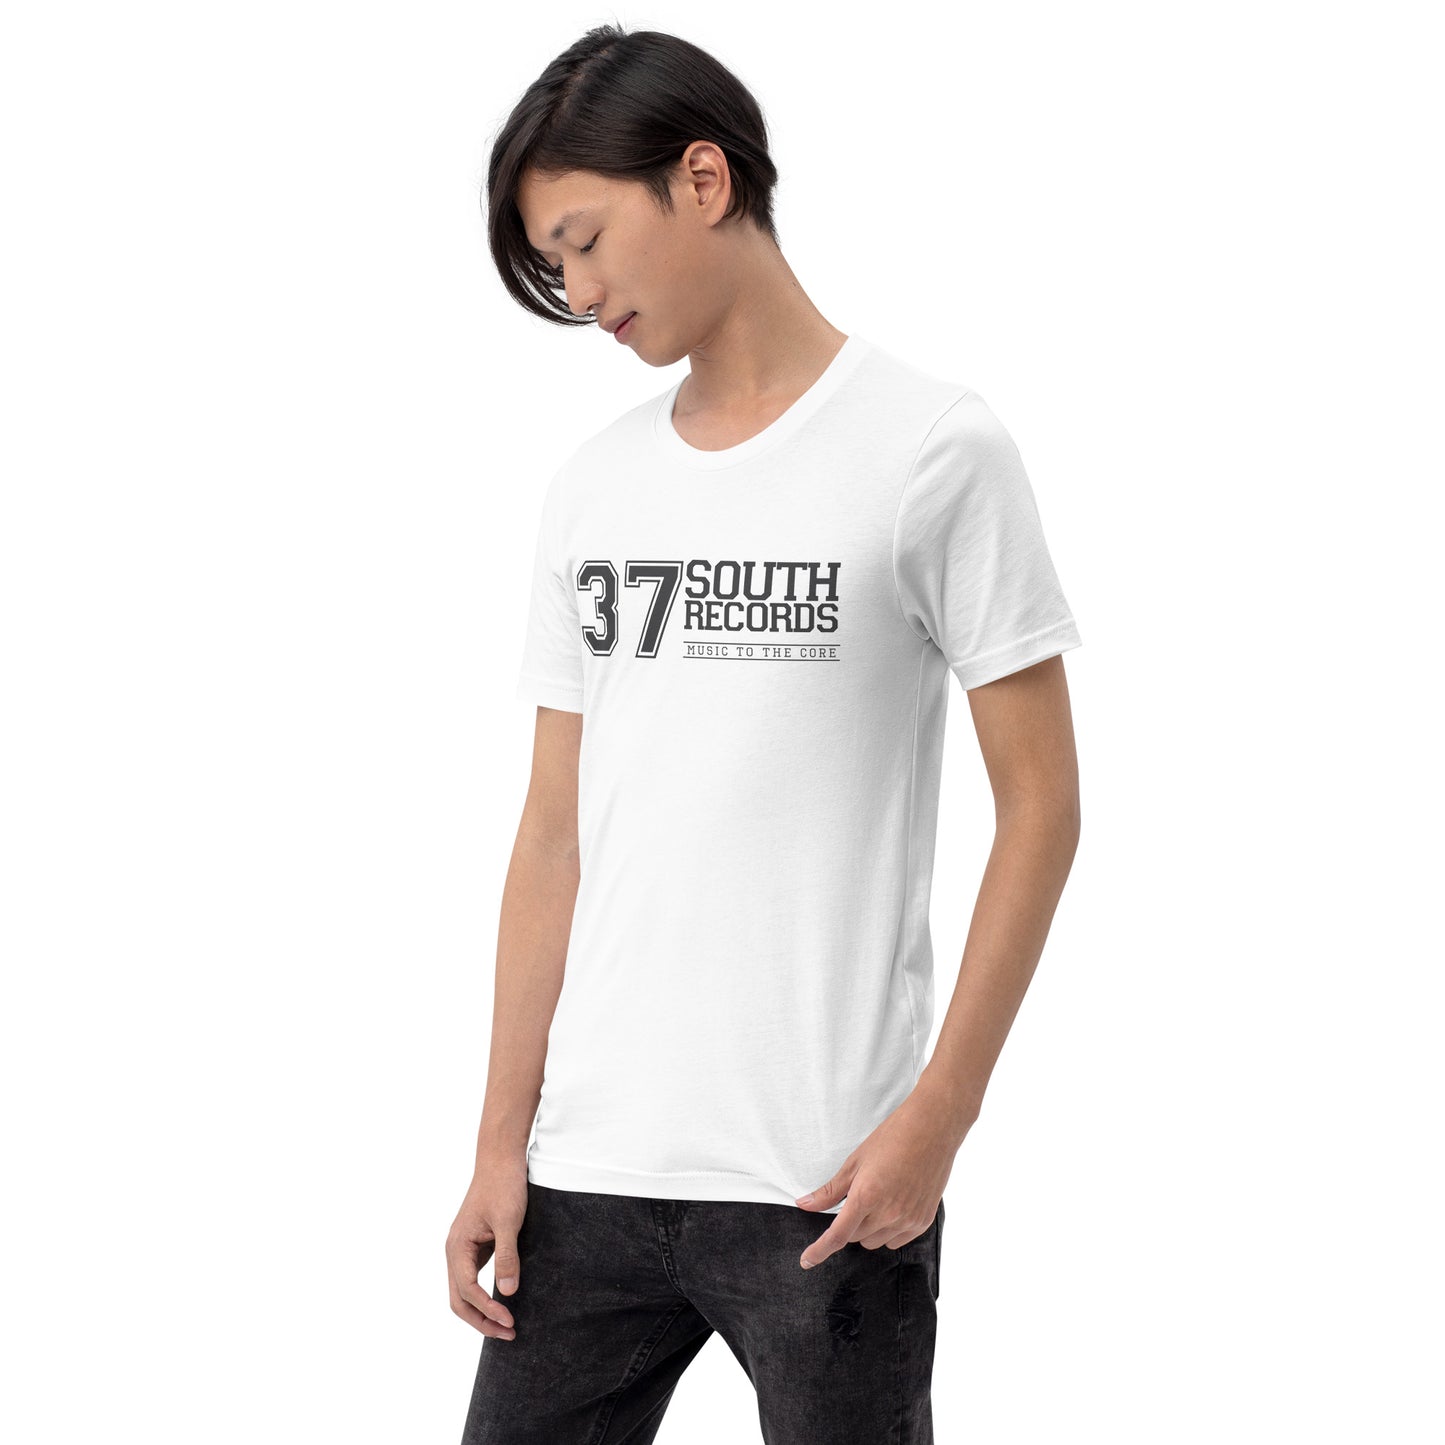 37 South Records Unisex Tee